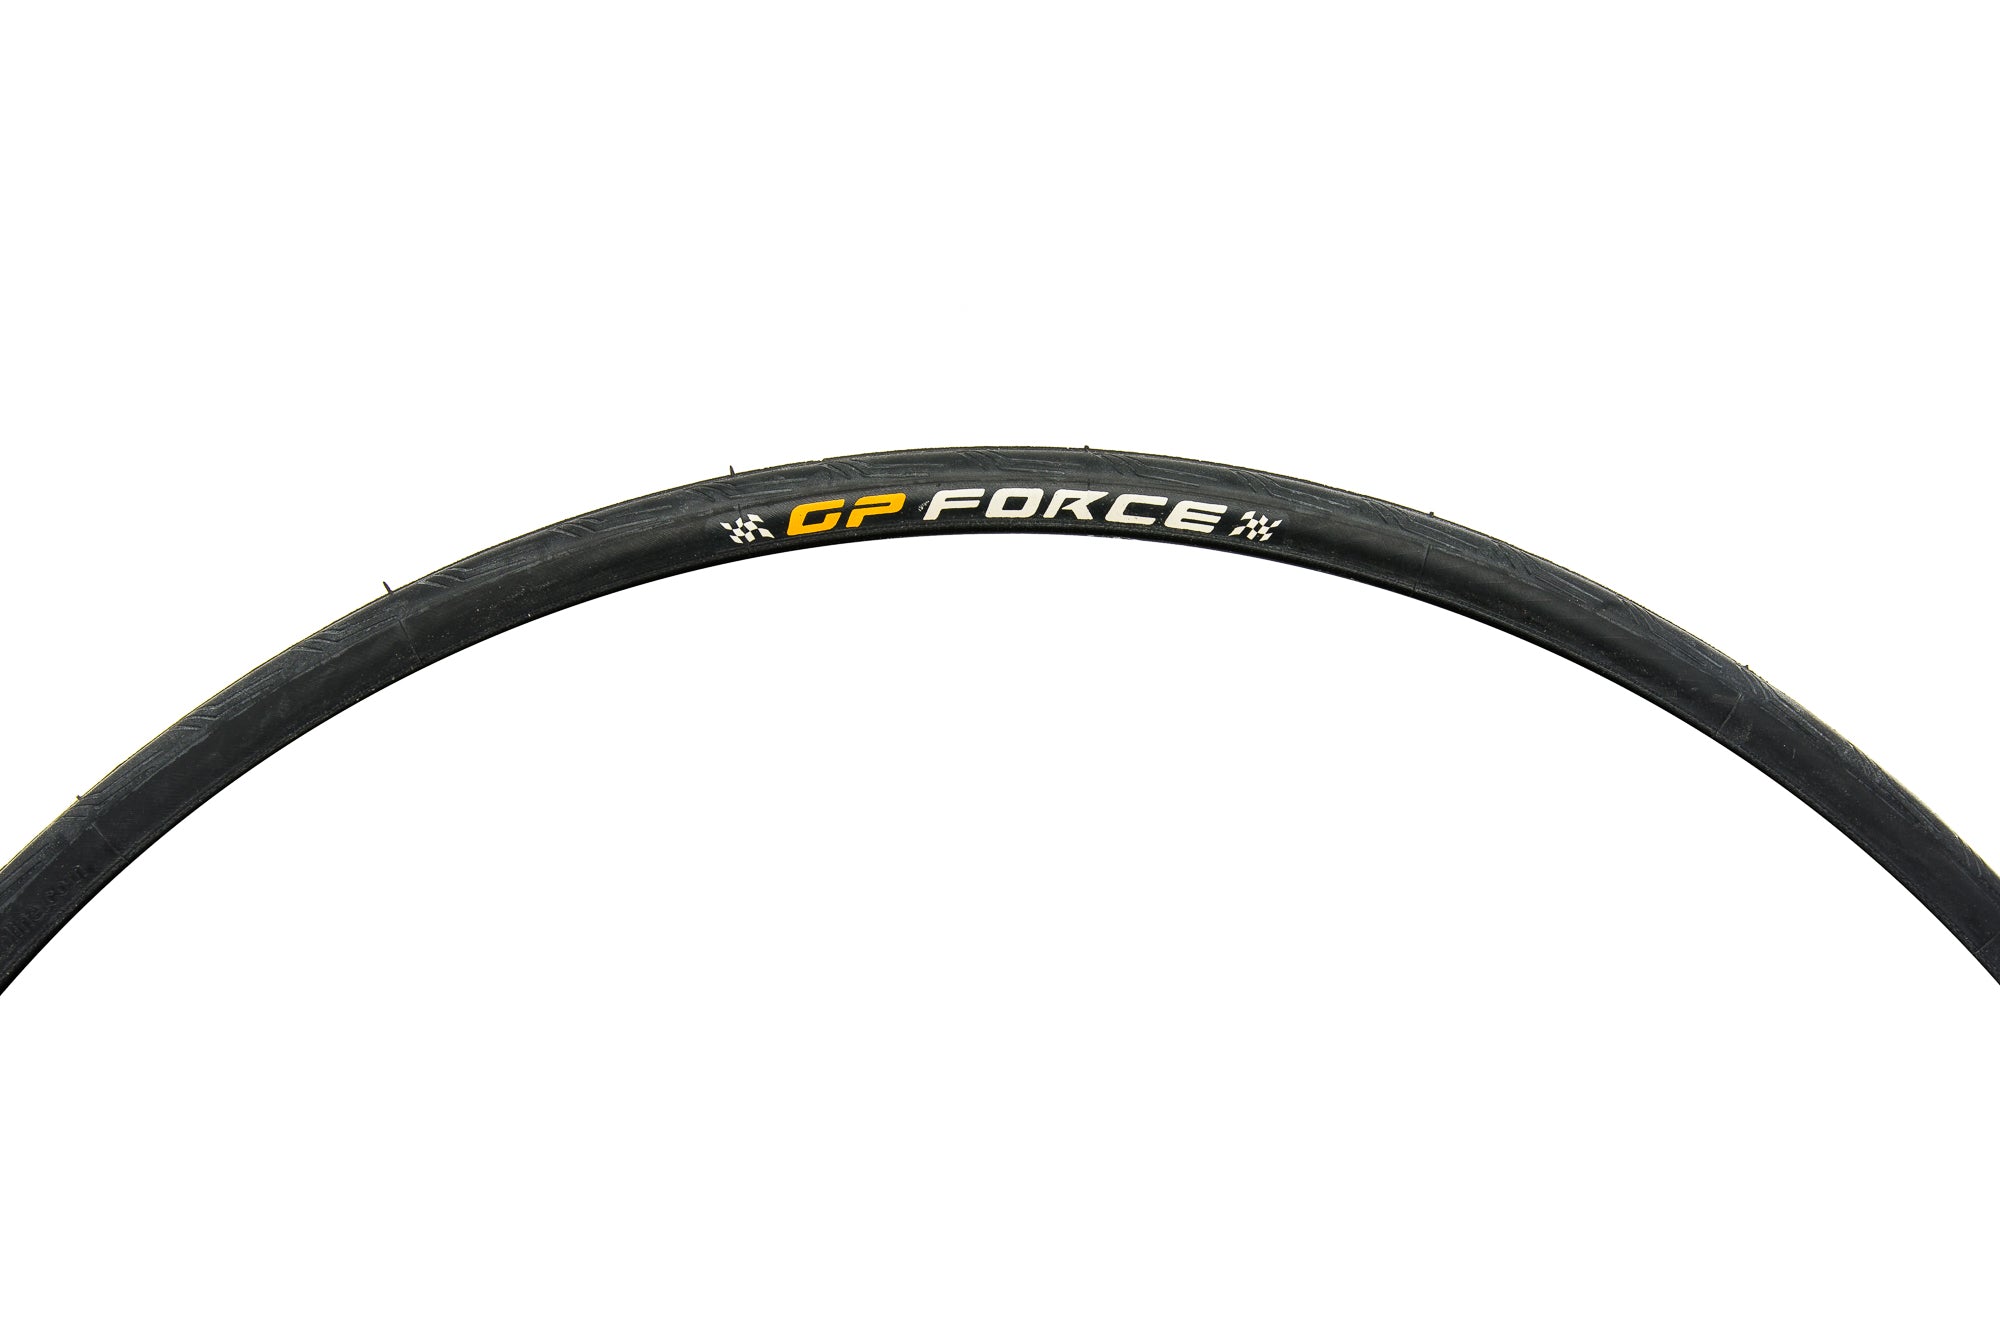 Continental Attack/Force (Pair) Tire 700 x 22/24C 330TPI Clincher Black front wheel